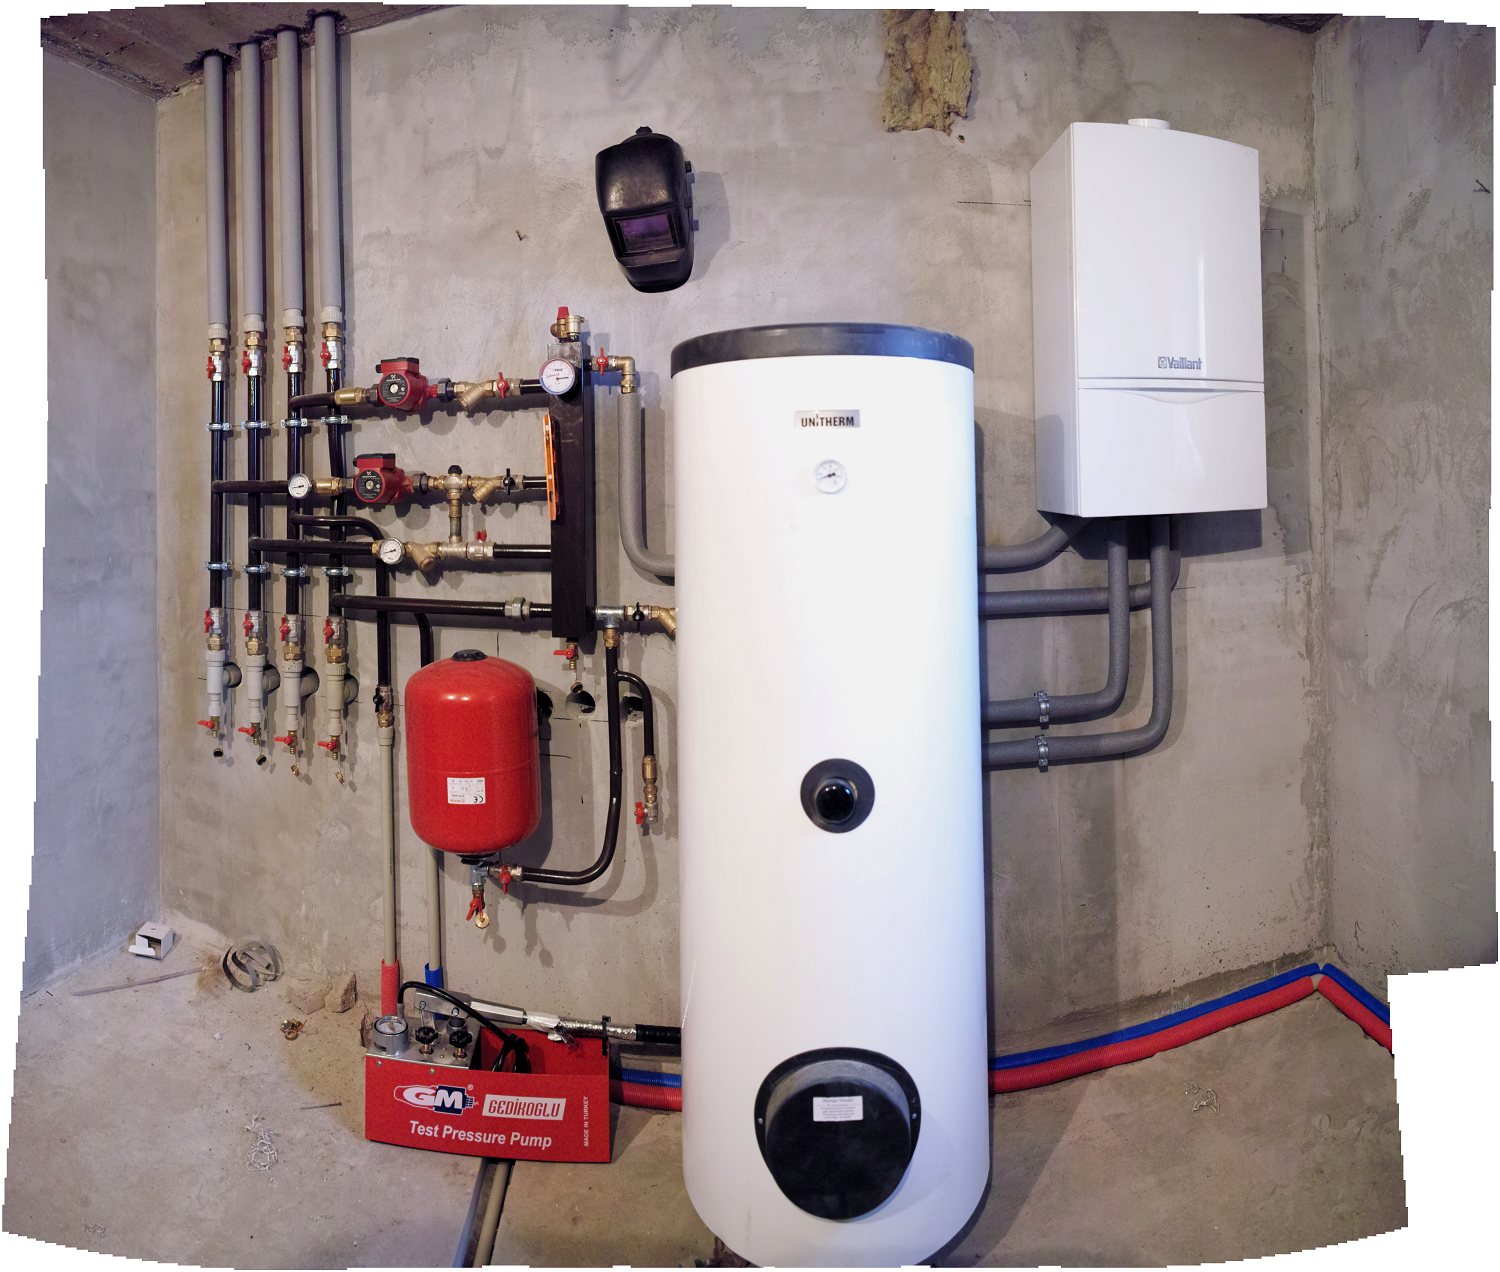 The tankless Gas Boiler and 200l hot water celinder.